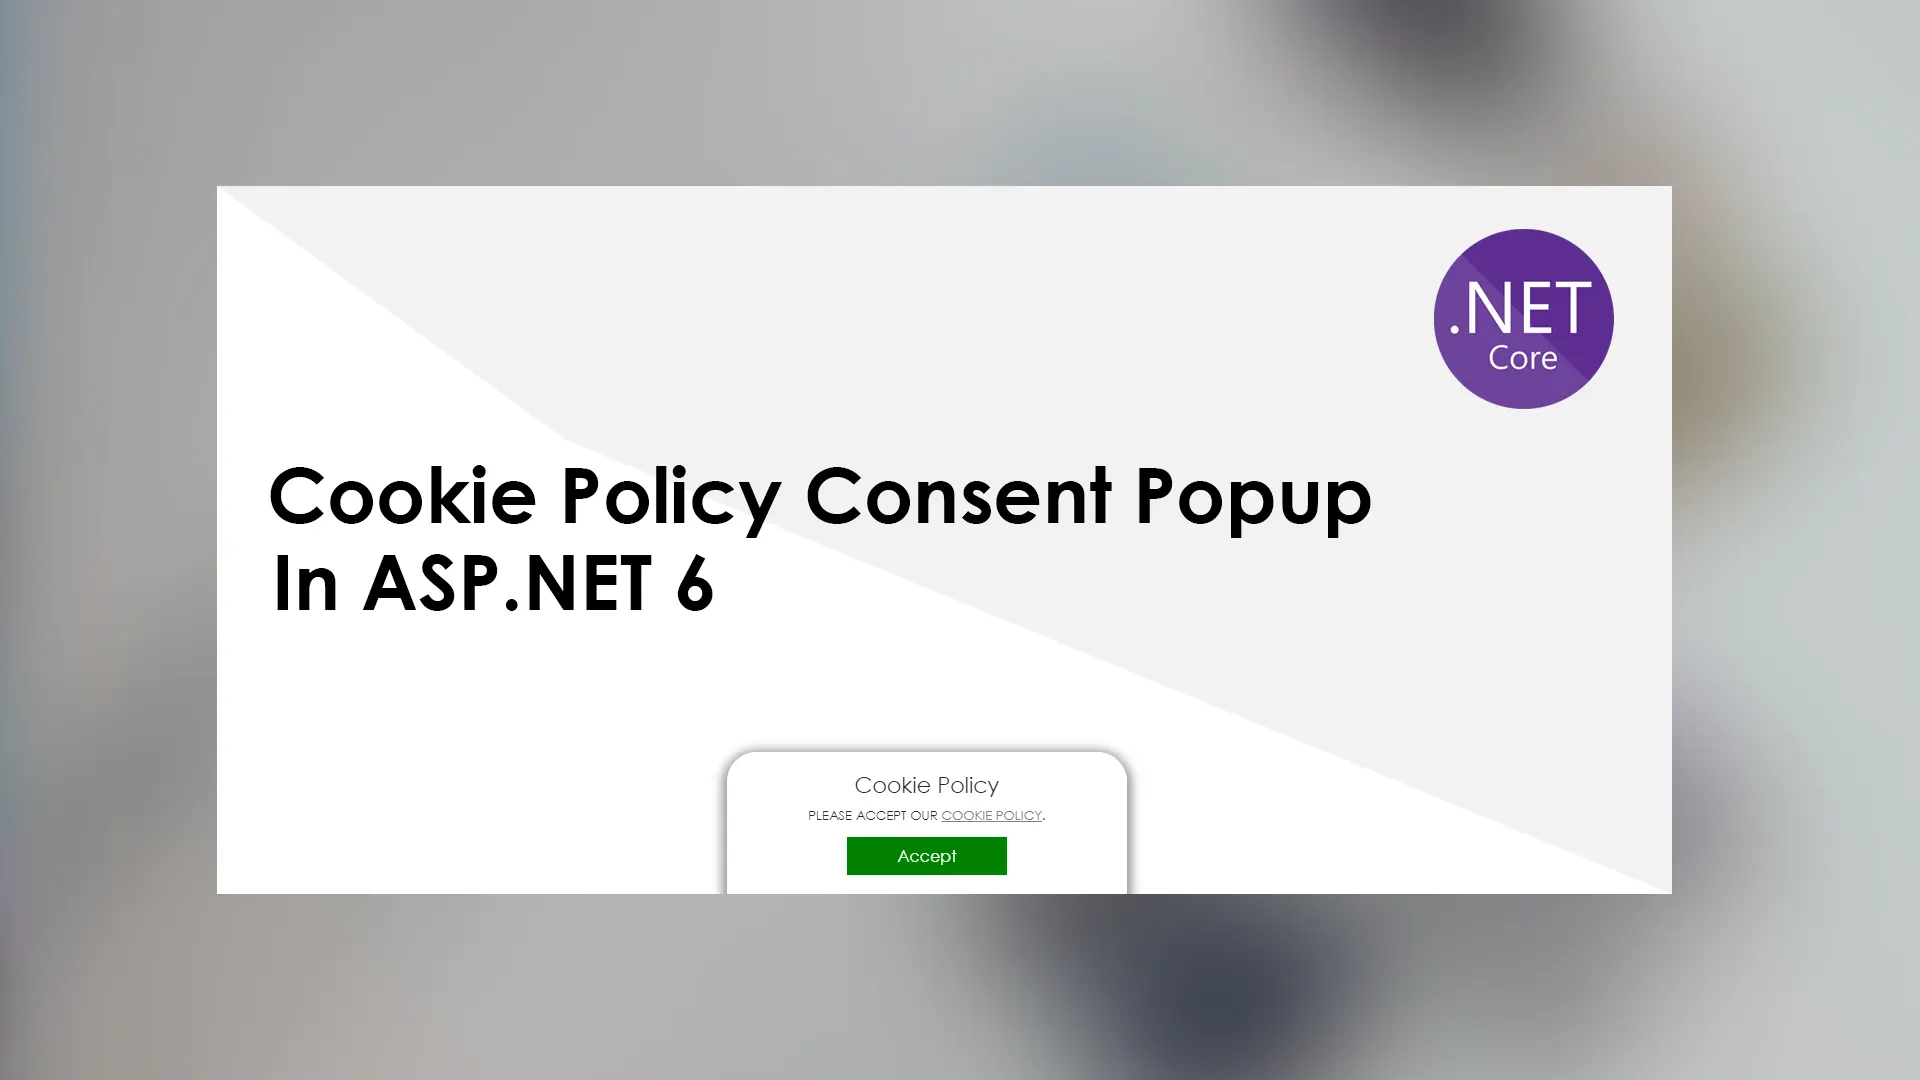 Creating a cookie policy consent popup in ASP.NET 6